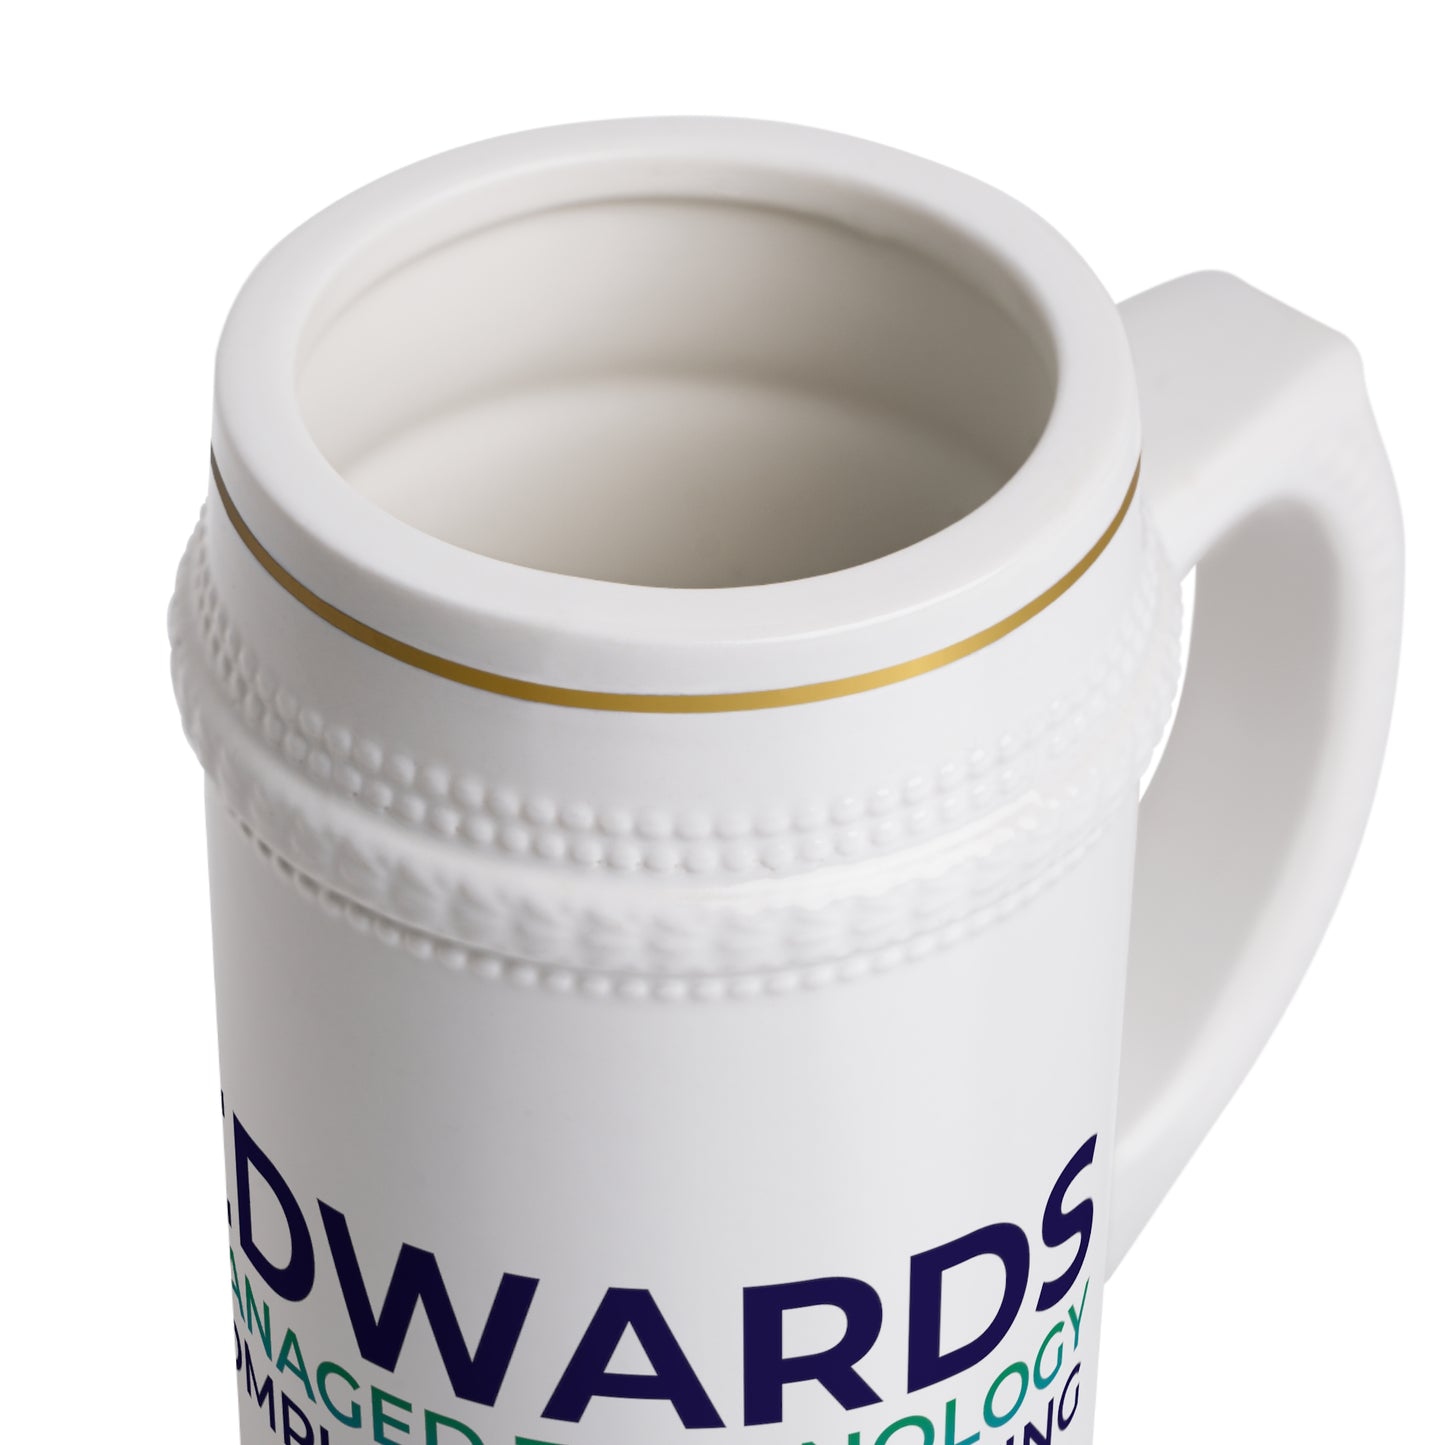 Edwards Managed Technology Computer Consulting Beer Stein Mug